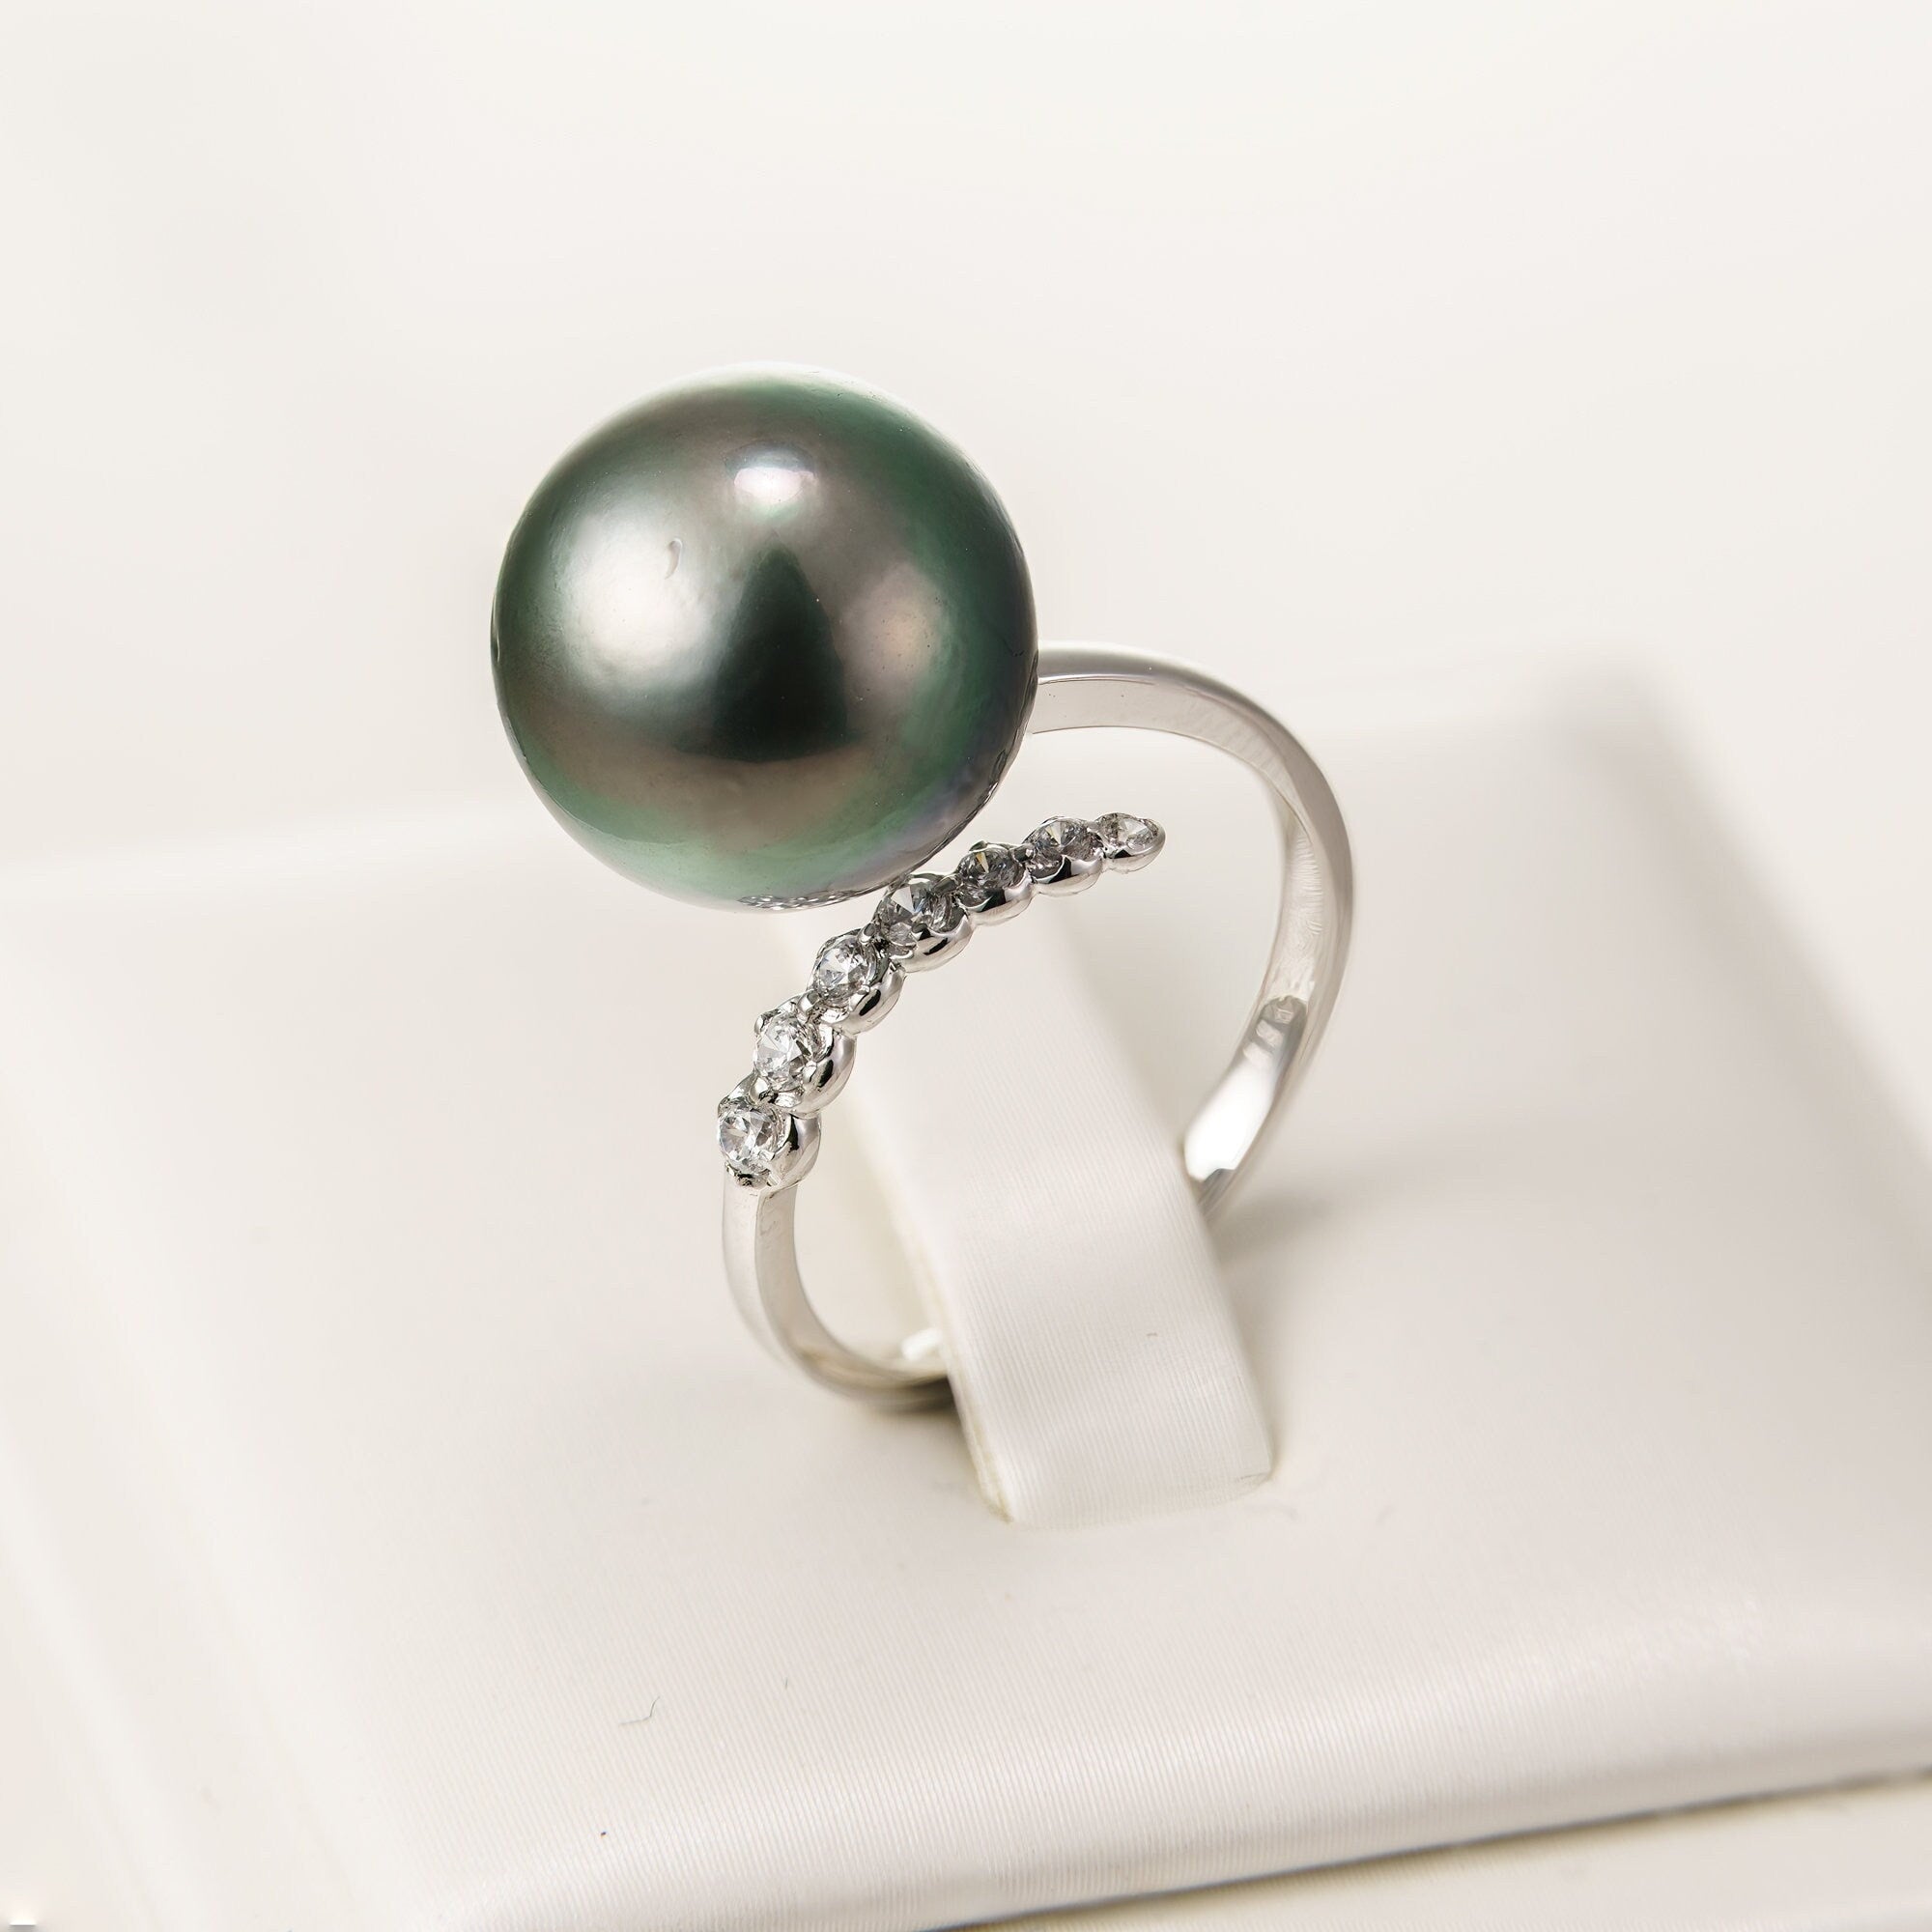 12mm tahitian pearl ring, size 5.5 us, 925 sterling silver with cubic zirconia